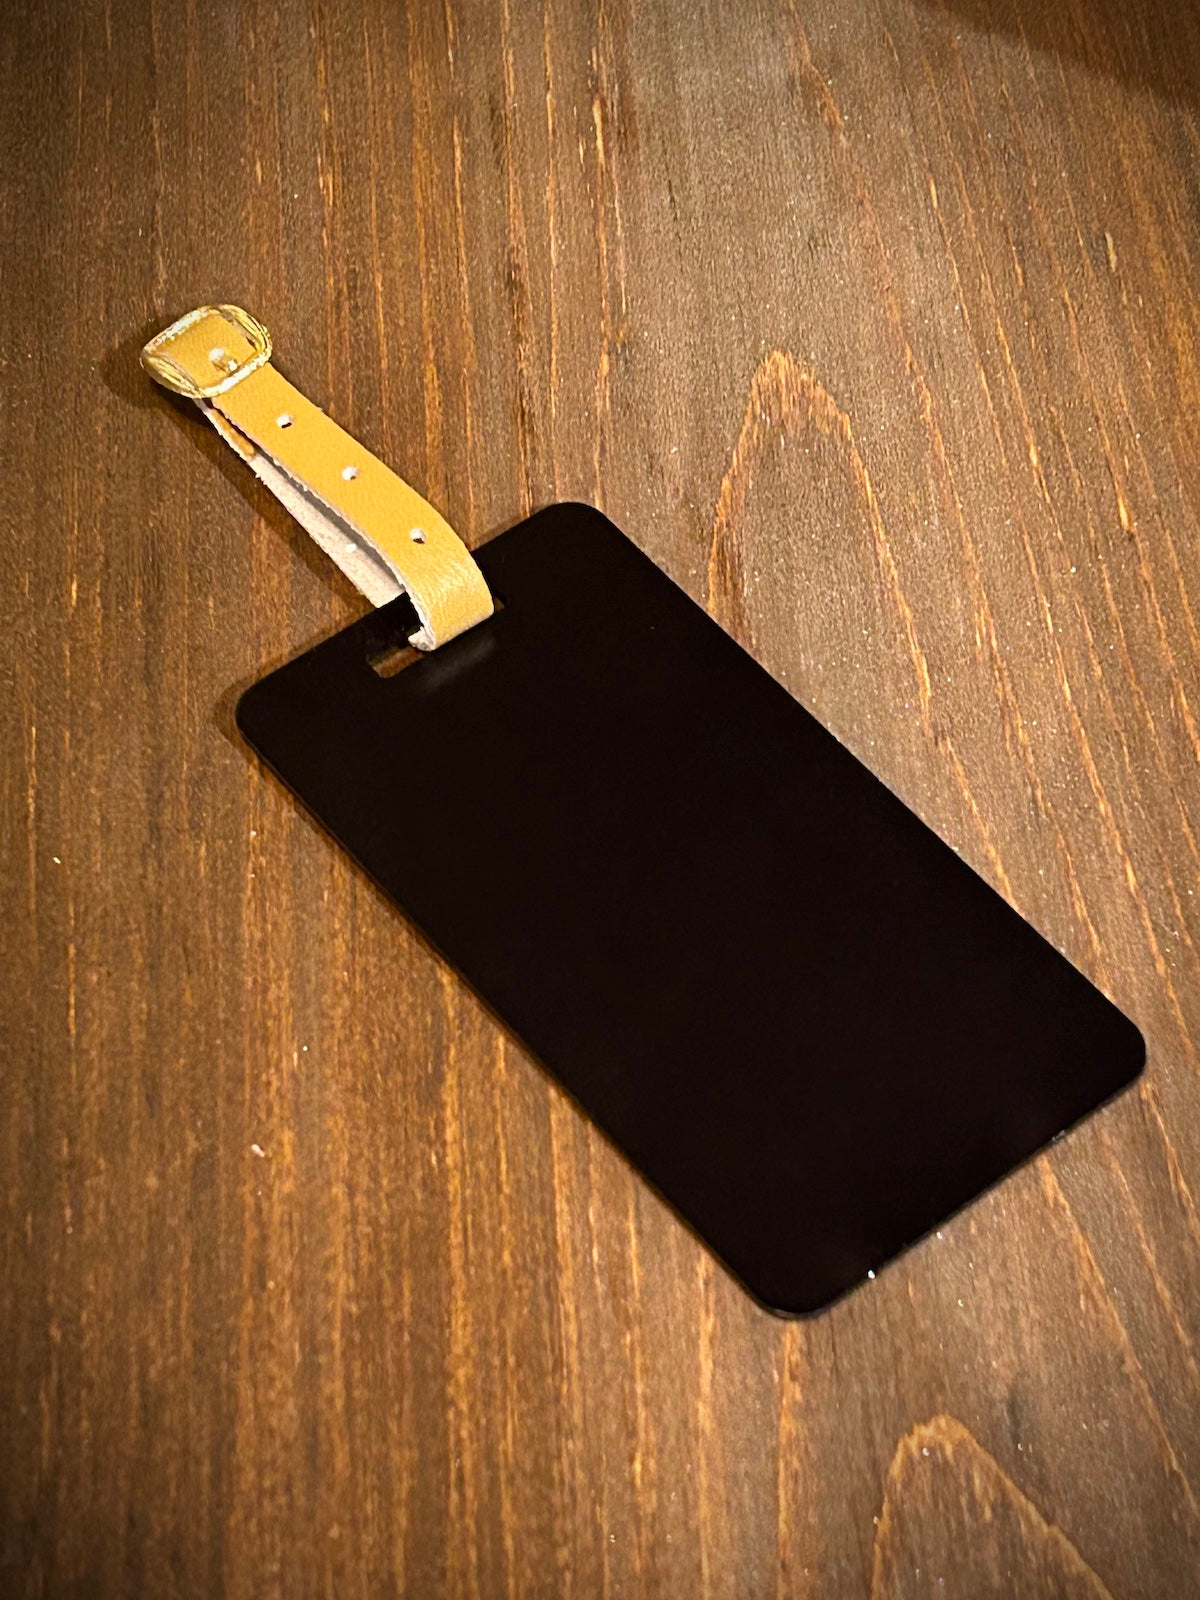 Black Anodized Aluminum Luggage Tag with Leather Strap